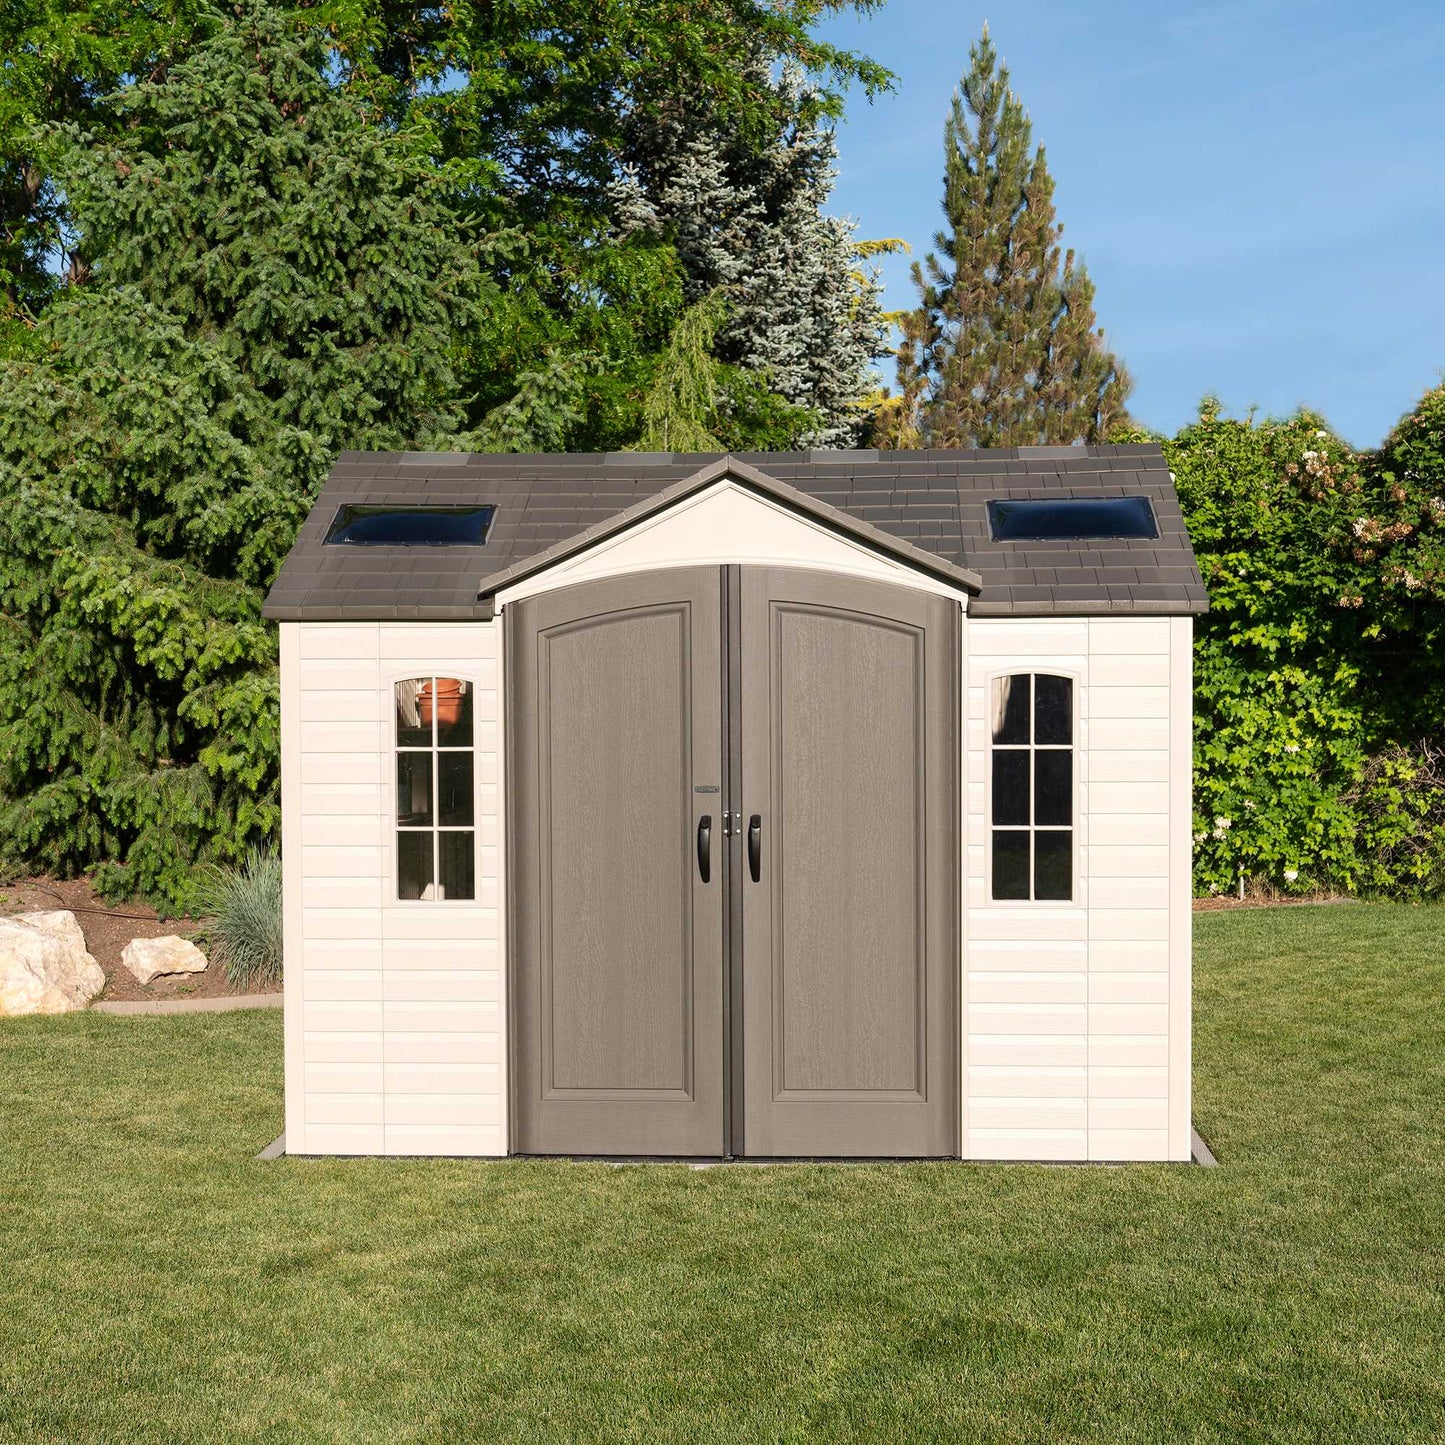 Lifetime 10 x 8' Outdoor Storage Shed